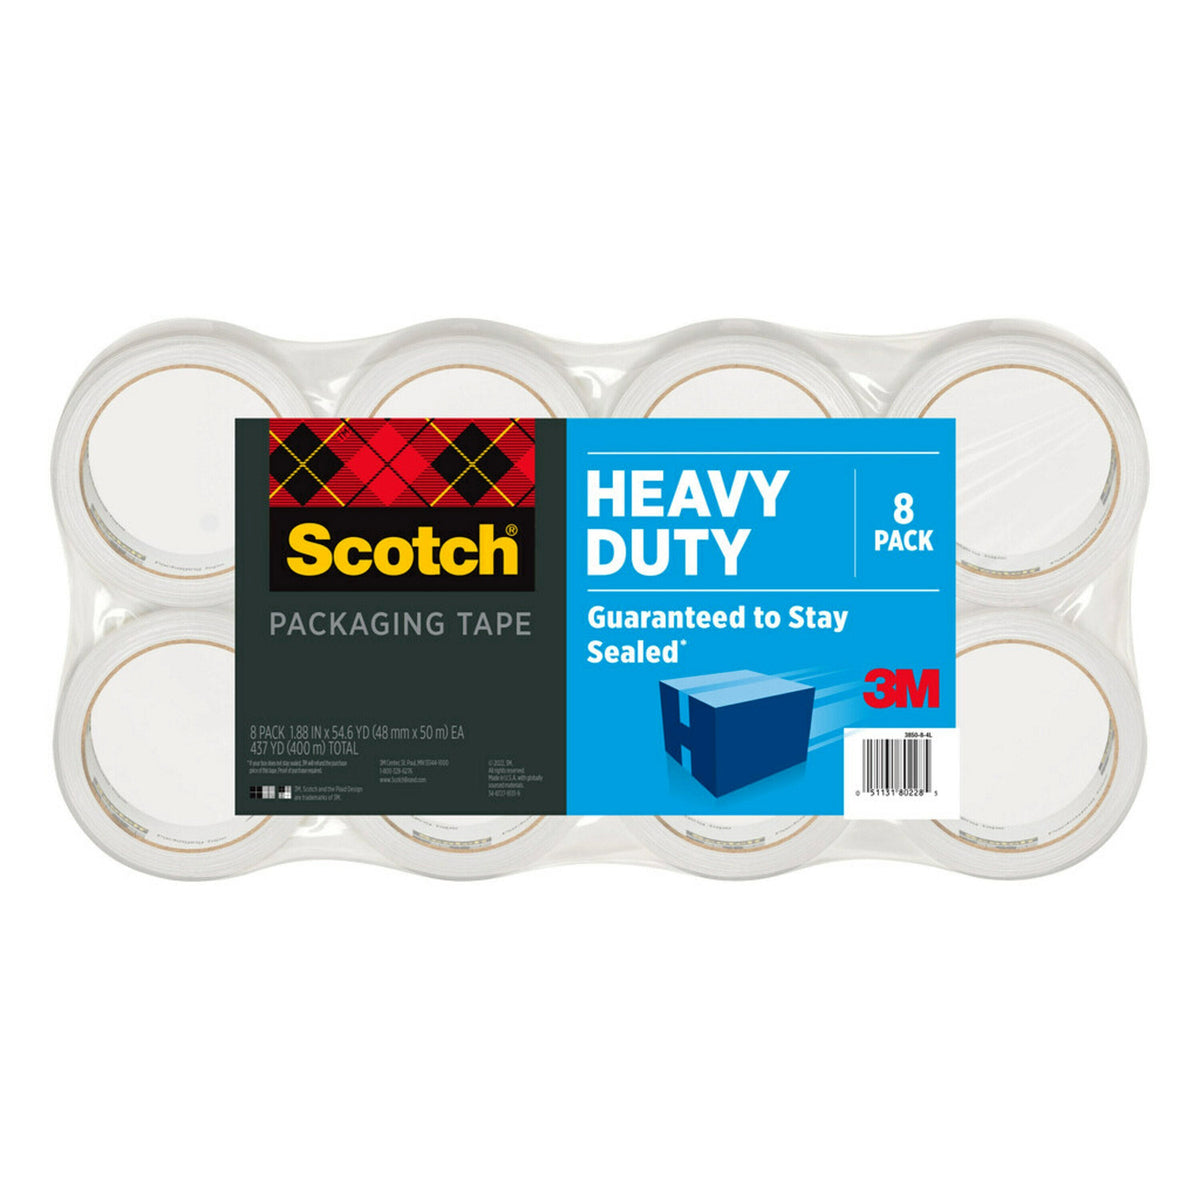 Scotch Heavy Duty Shipping Tape 8-pack Image